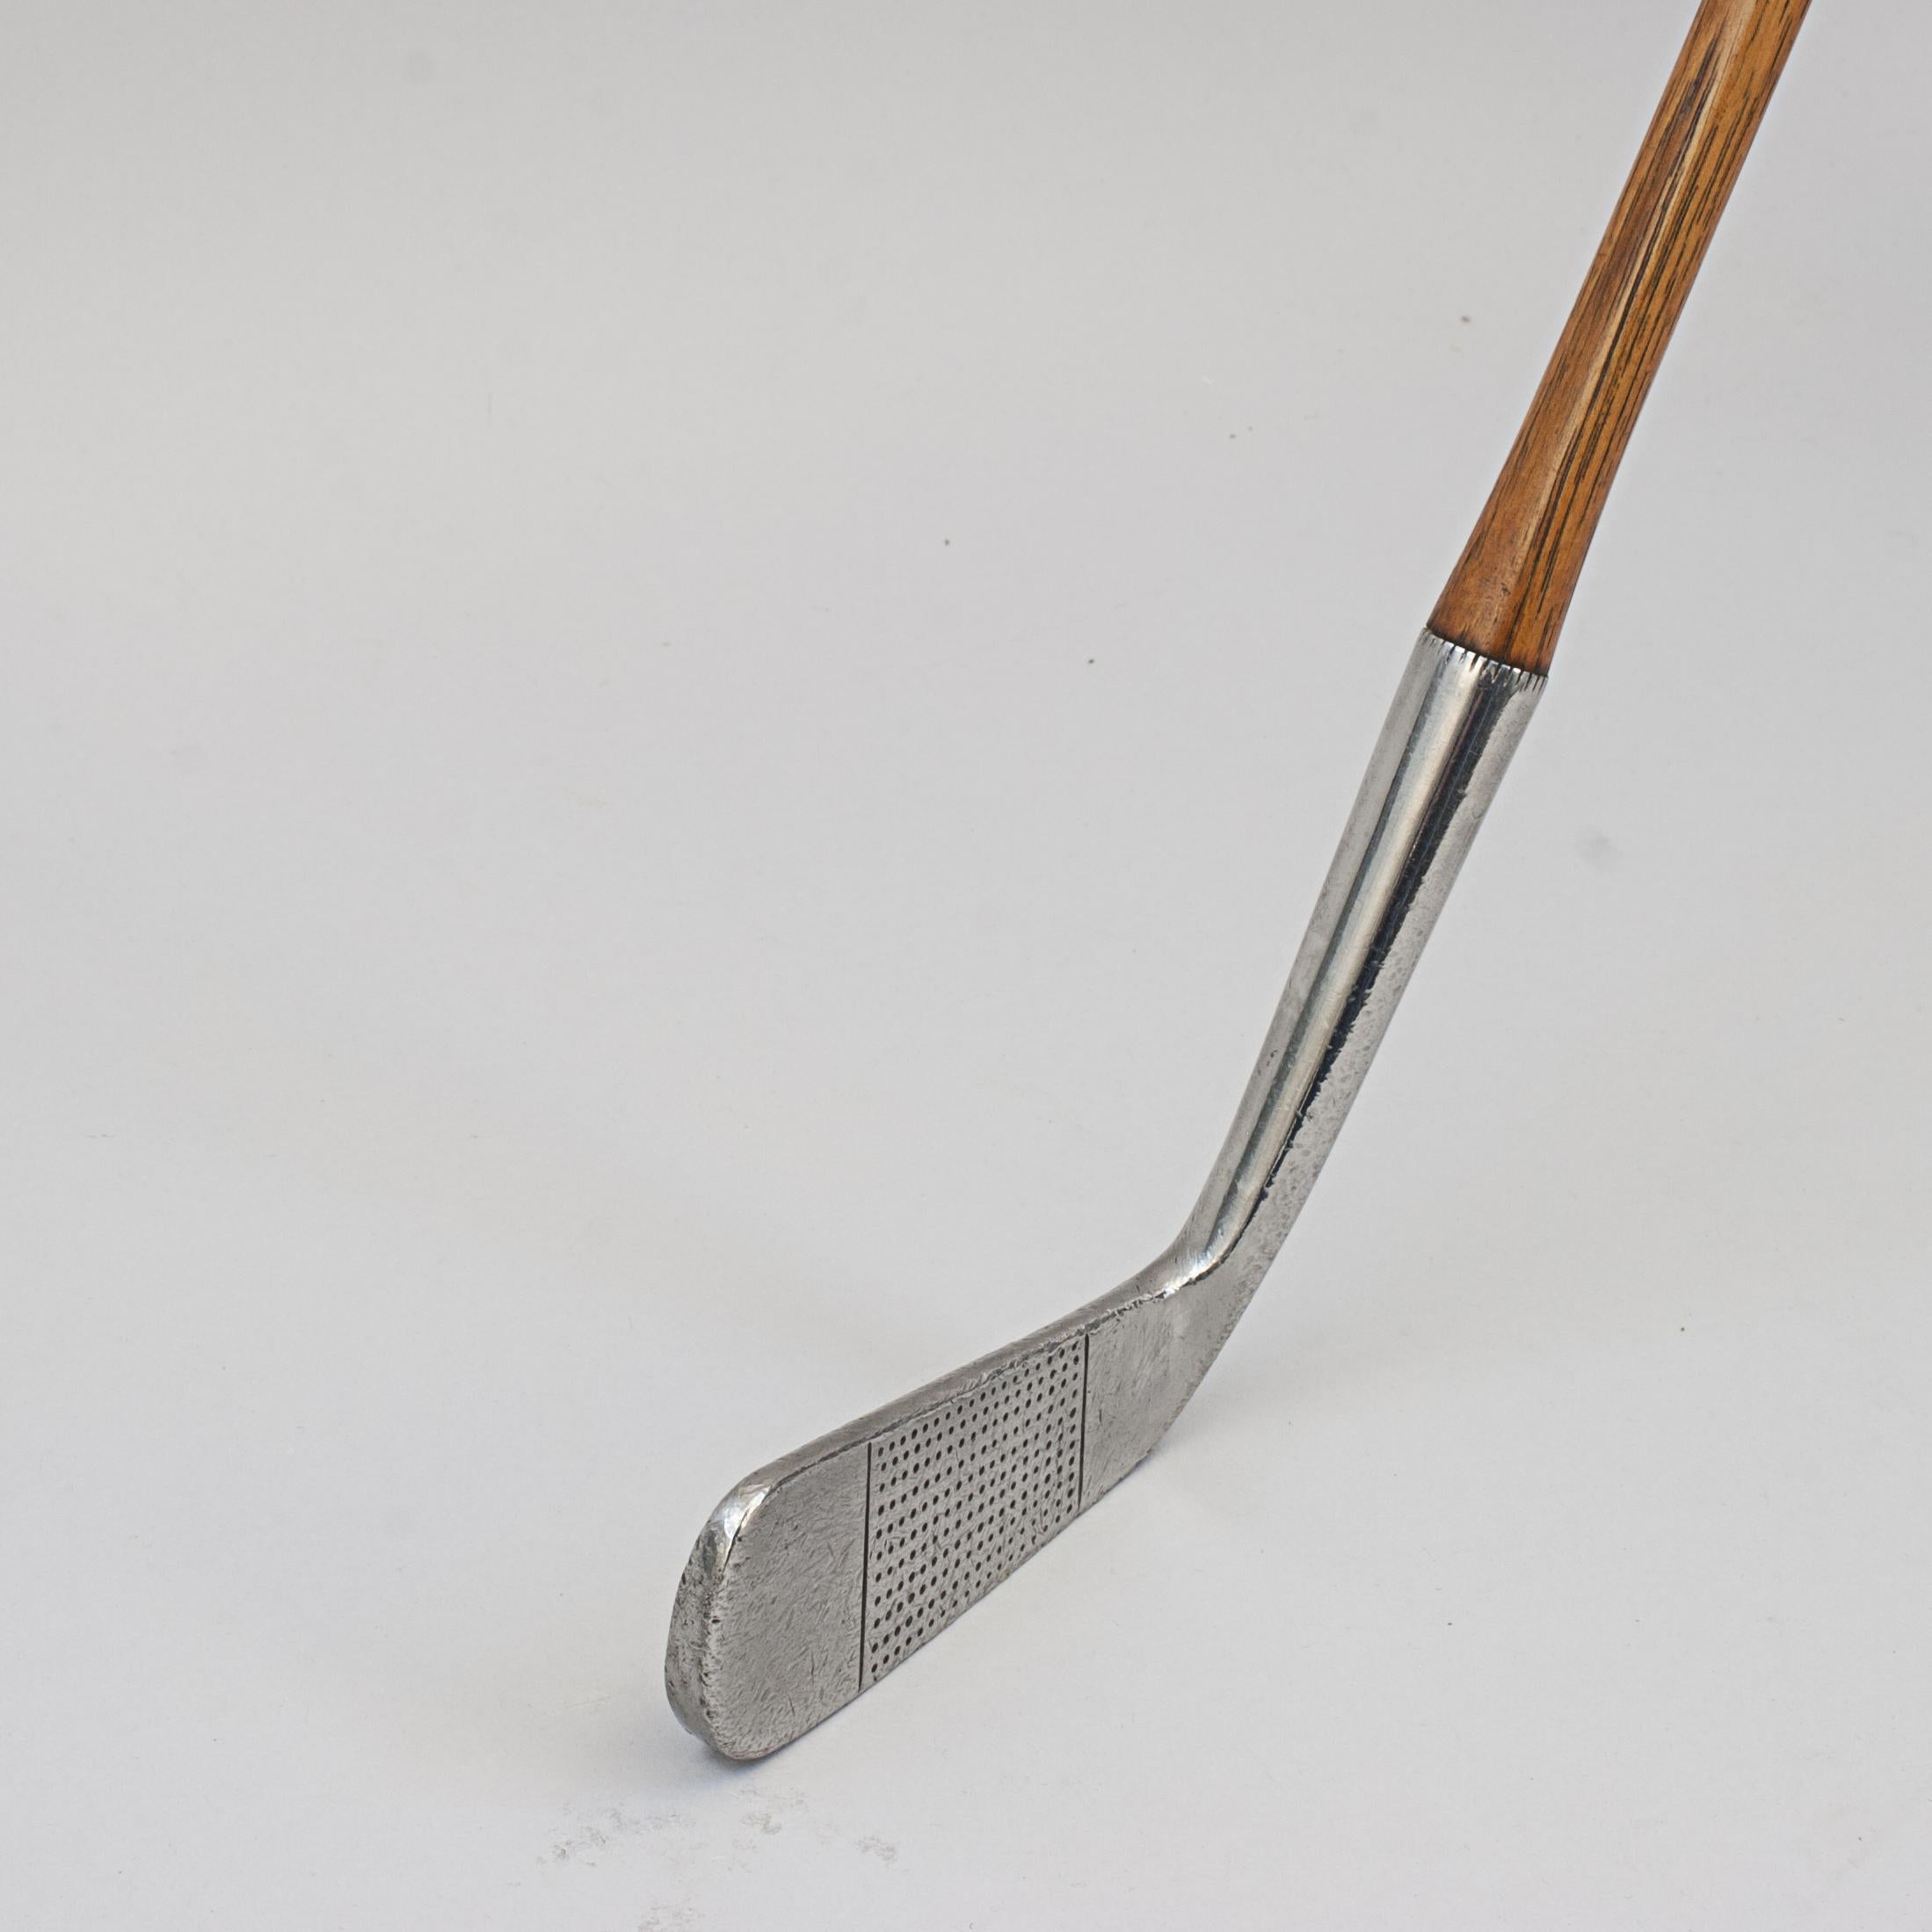 Hickory Golf Club, Blade Putter, The Knole.
Unusual bar backed hickory putter by Cyril Fryers, The Knole. The golf club with hickory shaft, suede leather grip, club face with dot punched face markings. The rear with extra weight across the center